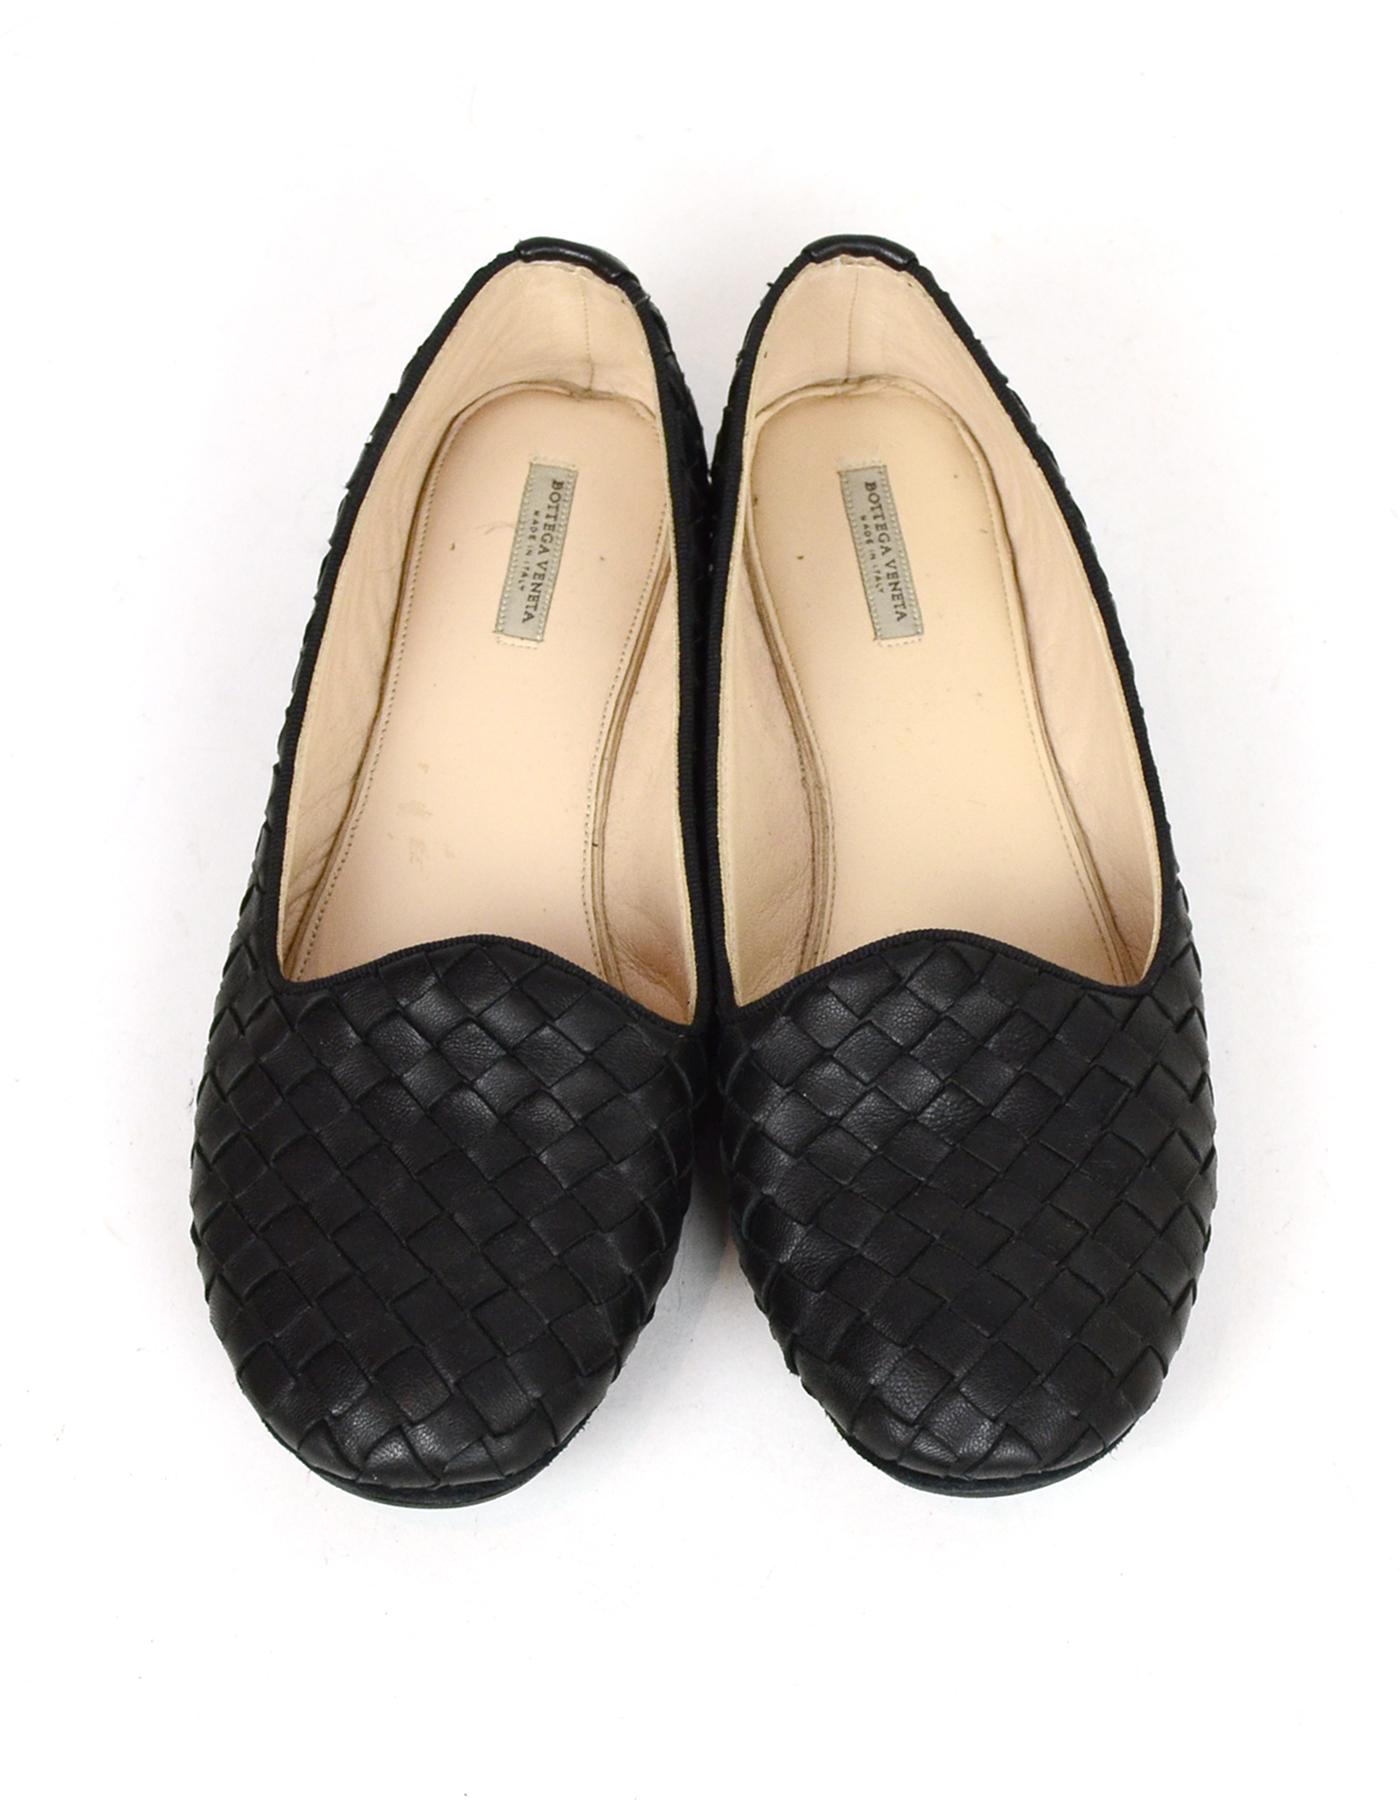 woven leather mules